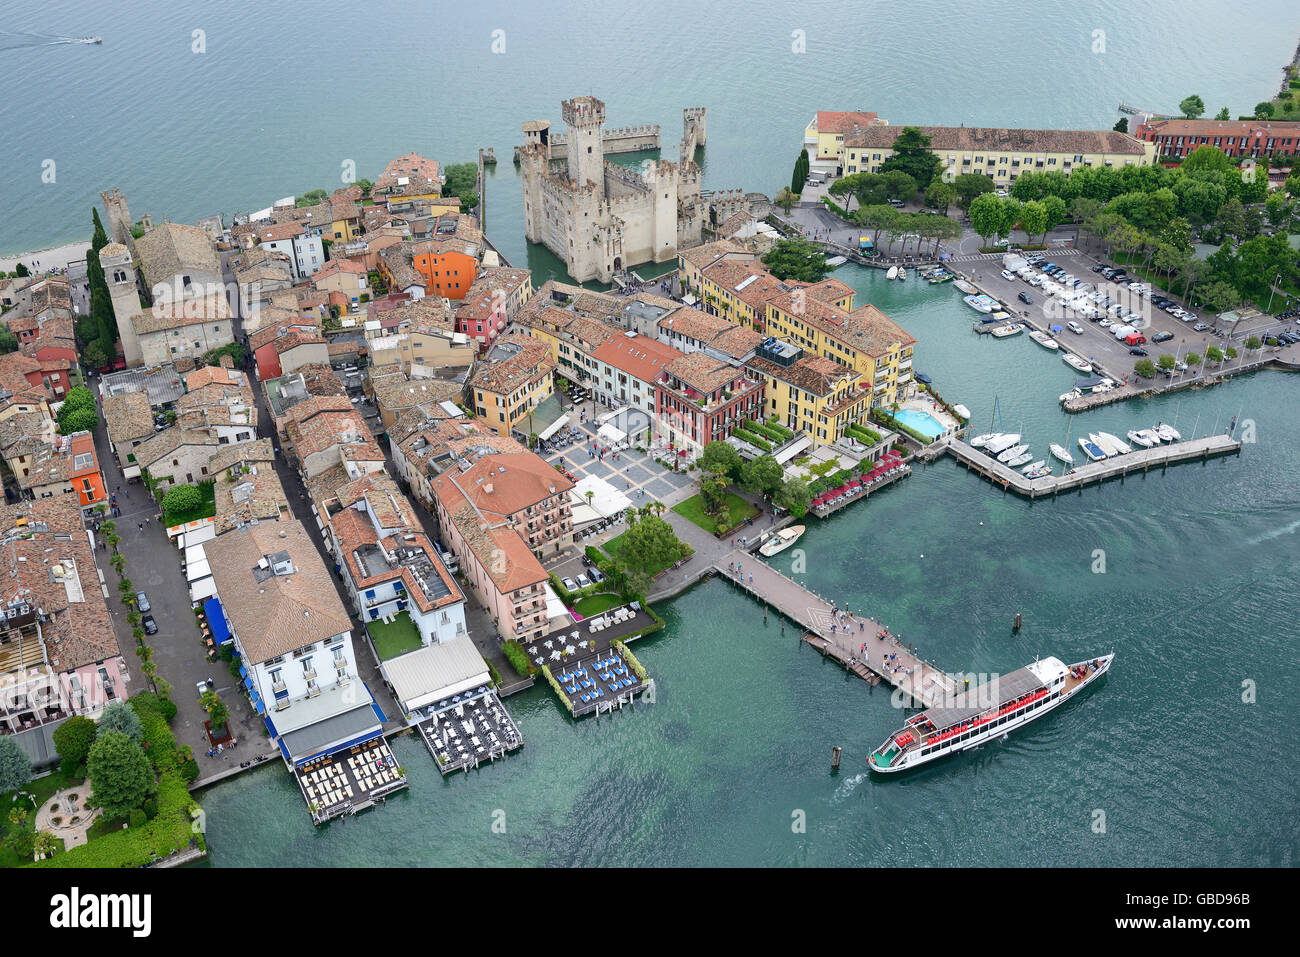 AERIAL VIEW. Medieval castle in a unique 'aquatic' setting on the shore of Lake Garda. Sirmione Peninsula, Province of Brescia, Lombardy, Italy. Stock Photo